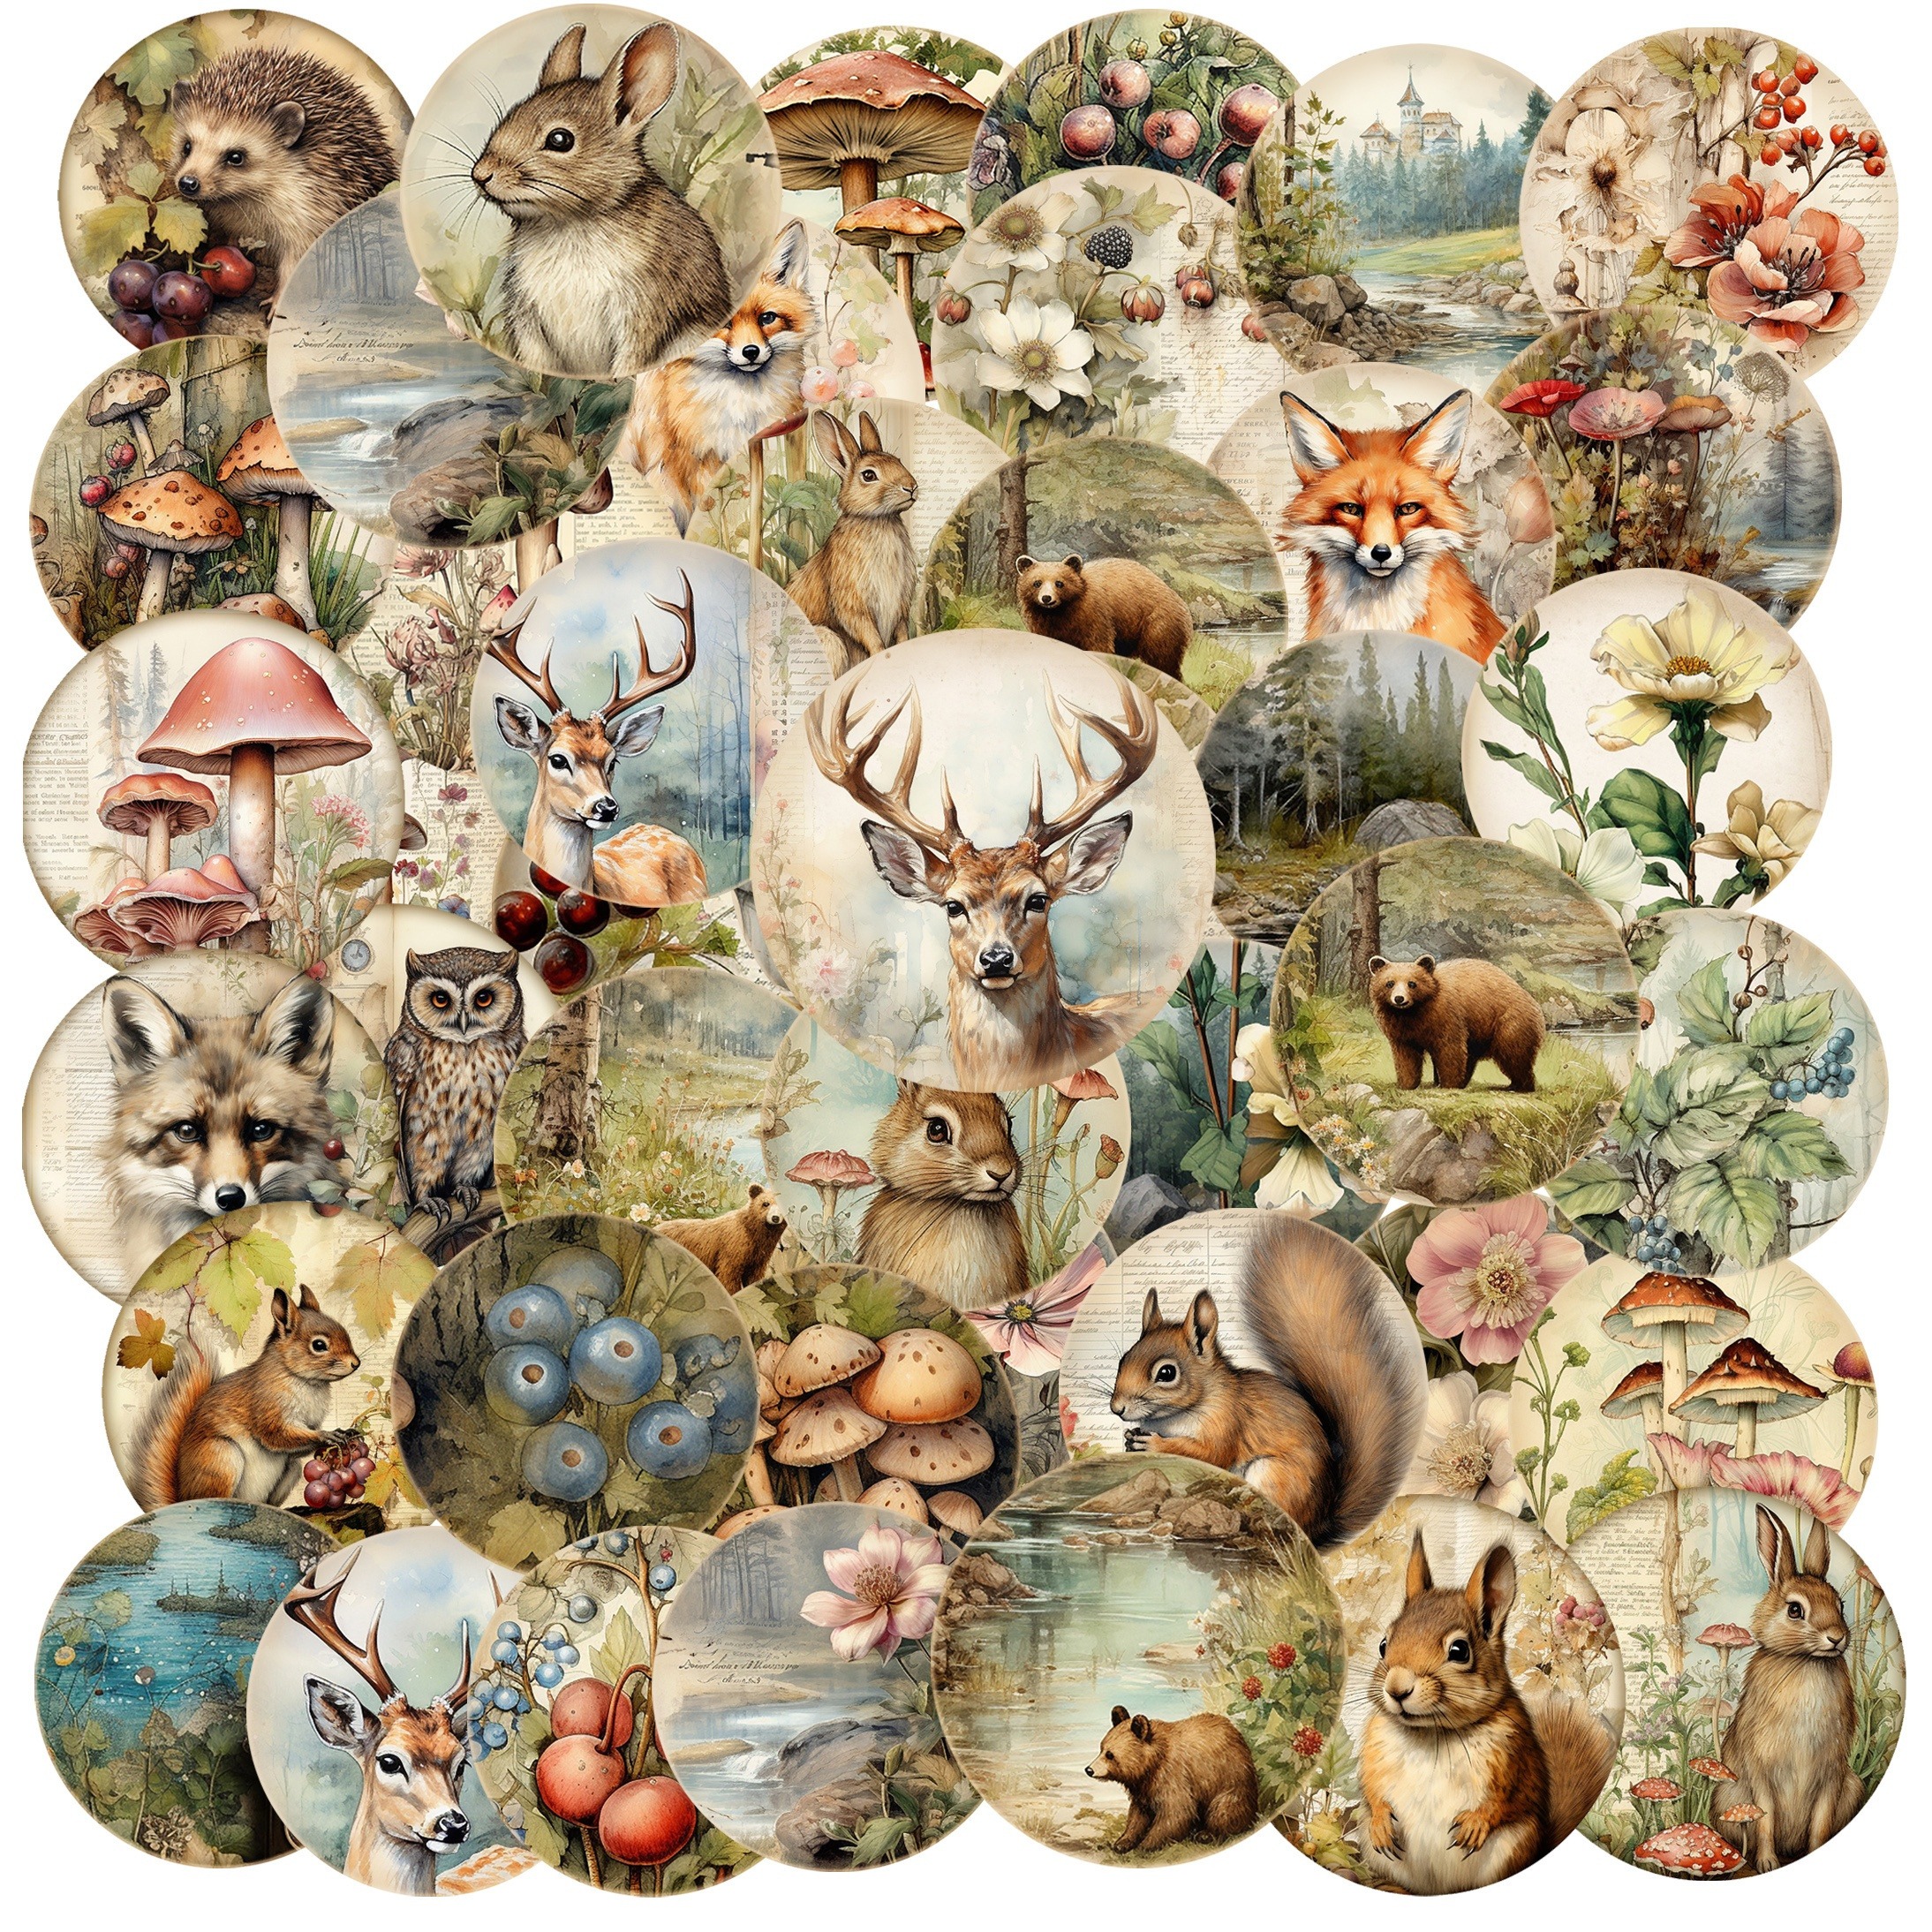 

96pcs Animal Forest Theme Diy Self-adhesive Decorative Sticker, Perfect For Diy Crafts, Gift Wrapping, Scrapbooking Supplies, Bullet Journals, Water Bottle, Greeting Card Decoration